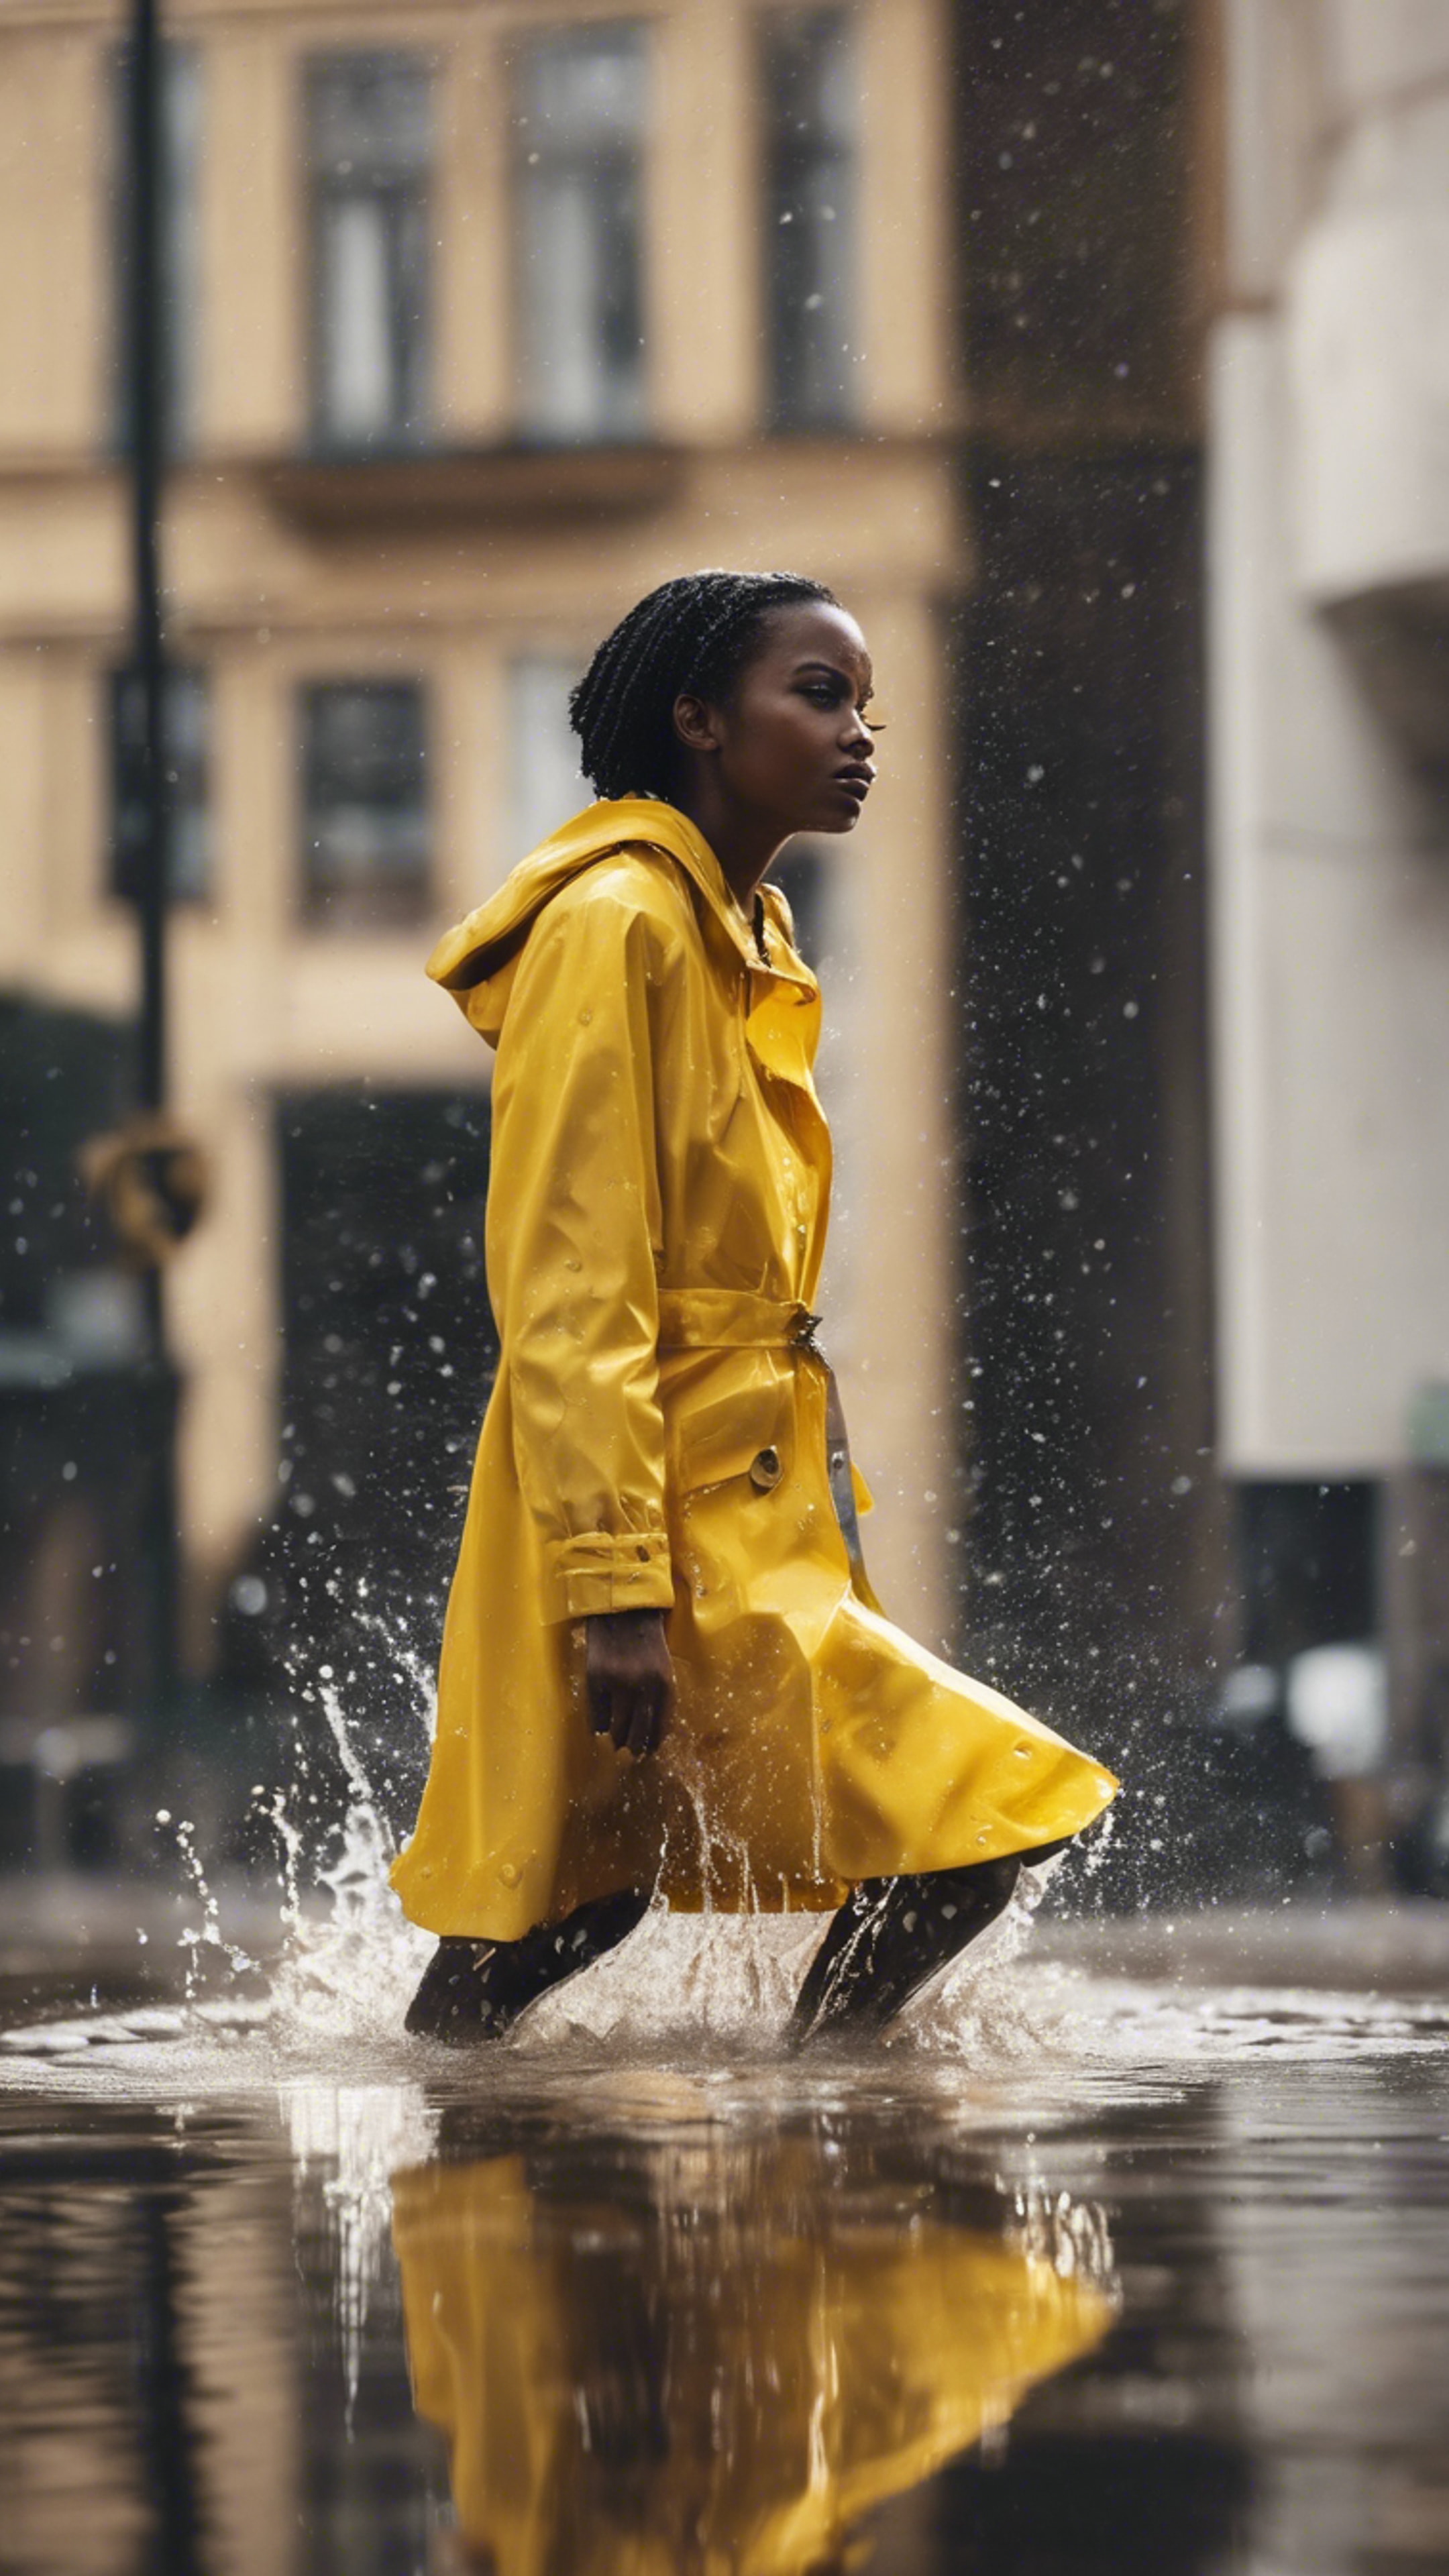 A black girl in a bright yellow raincoat splashing water in puddles after a heavy rain. Papel de parede[a80398e4c066404db875]